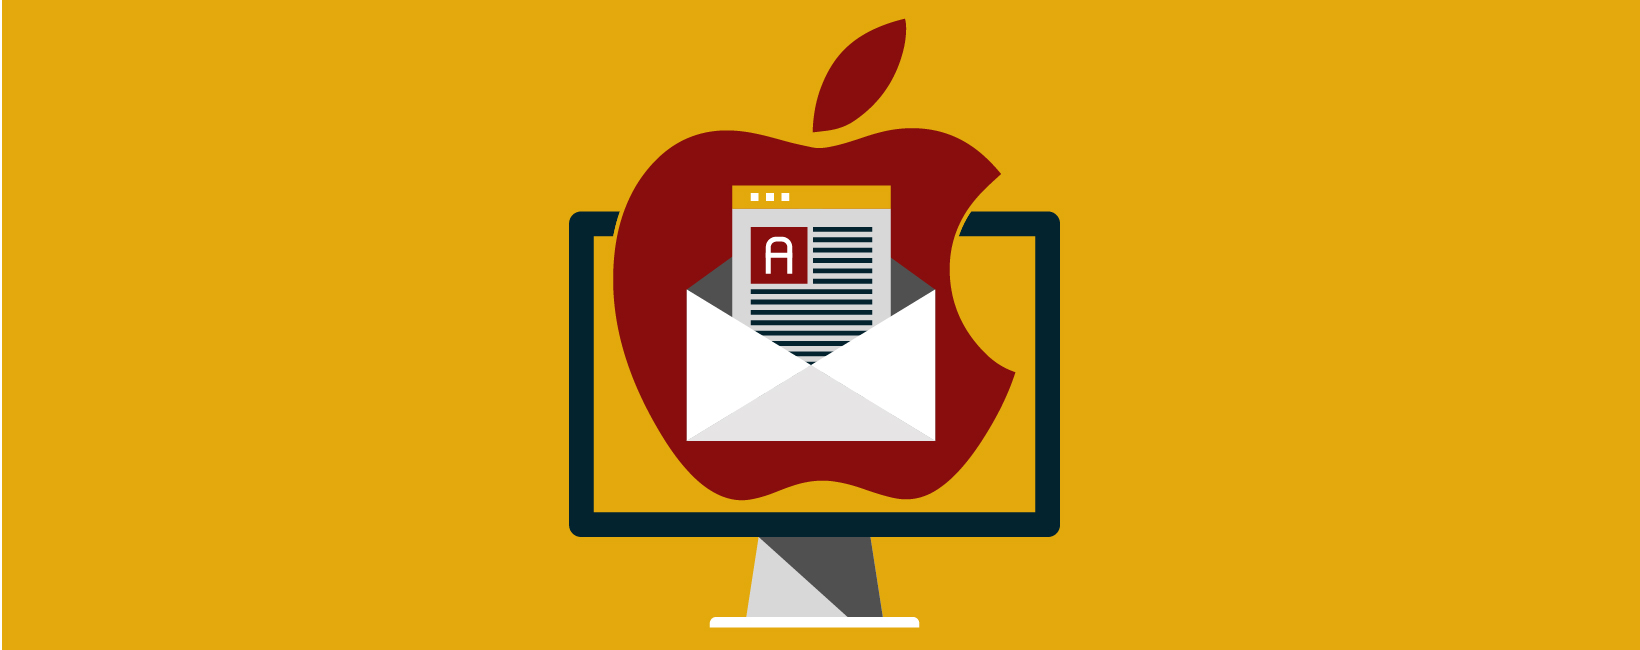 Red Apple Logo behind an opened letter